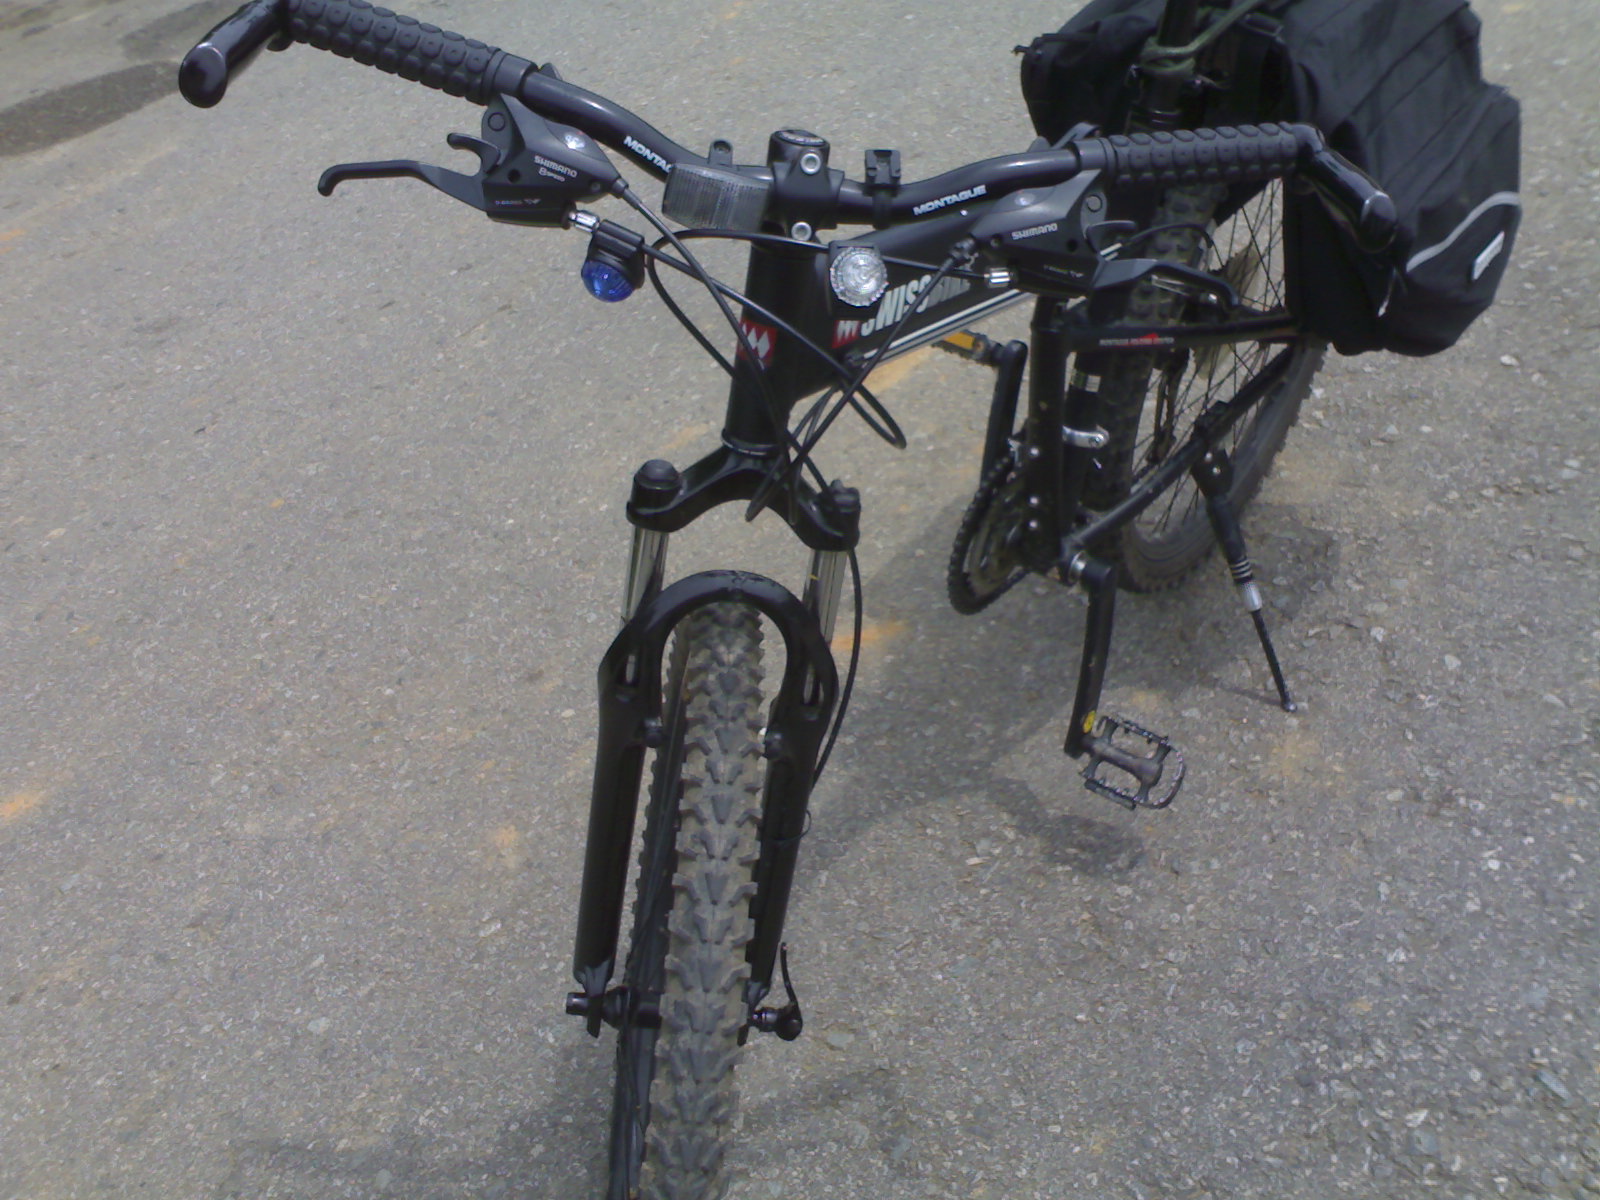 the rear and back view of a bike with bags strapped on it